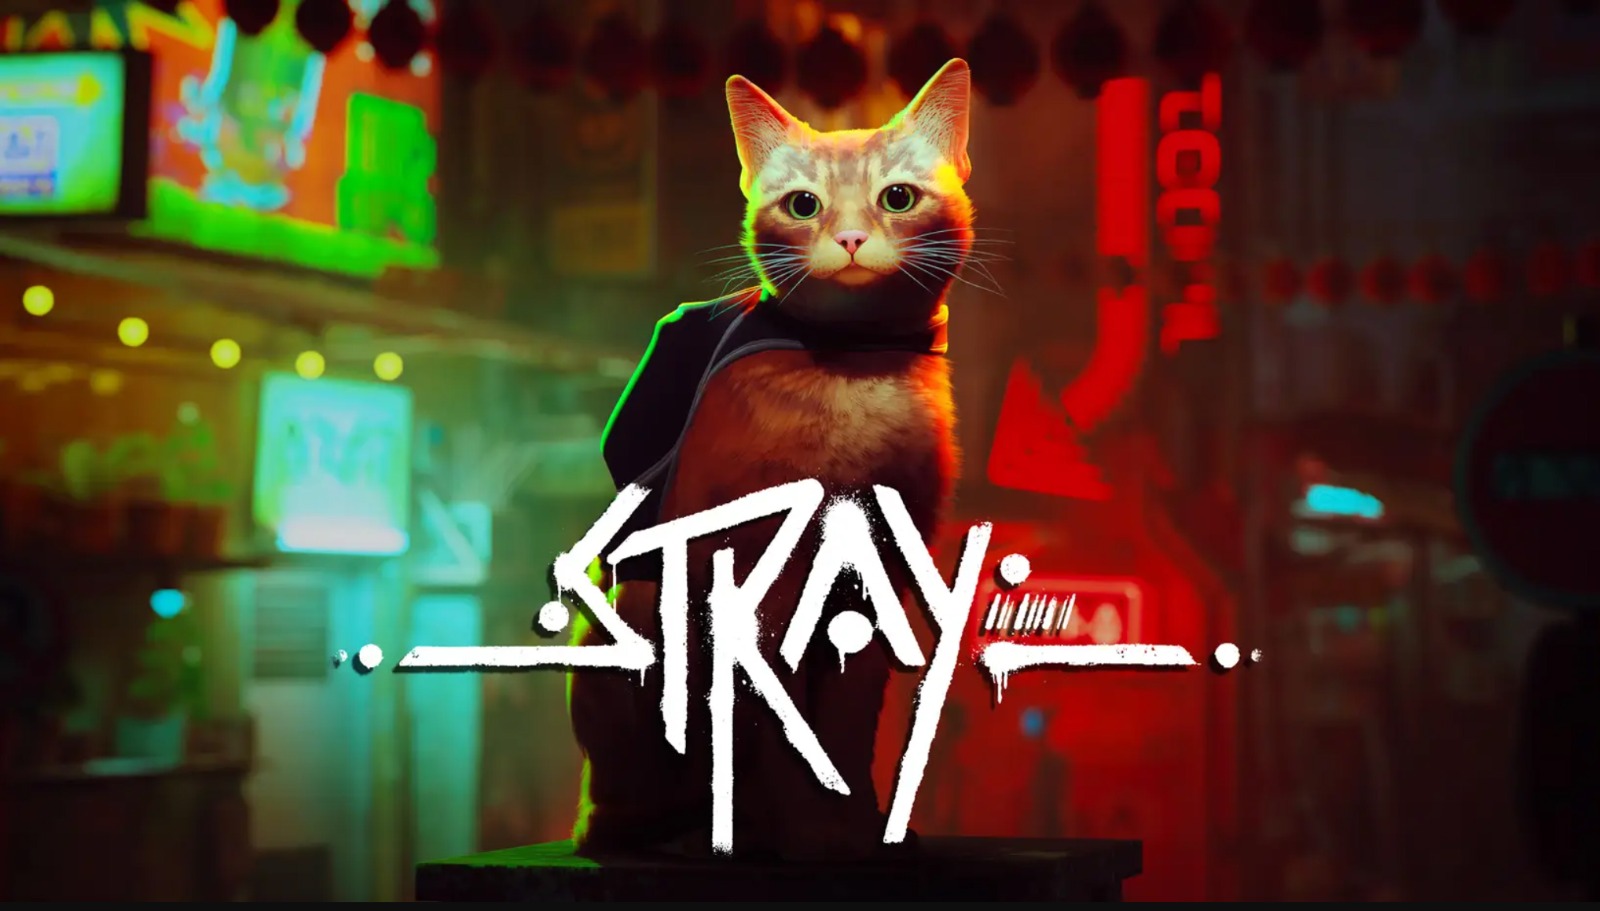 Stray download the new version for windows